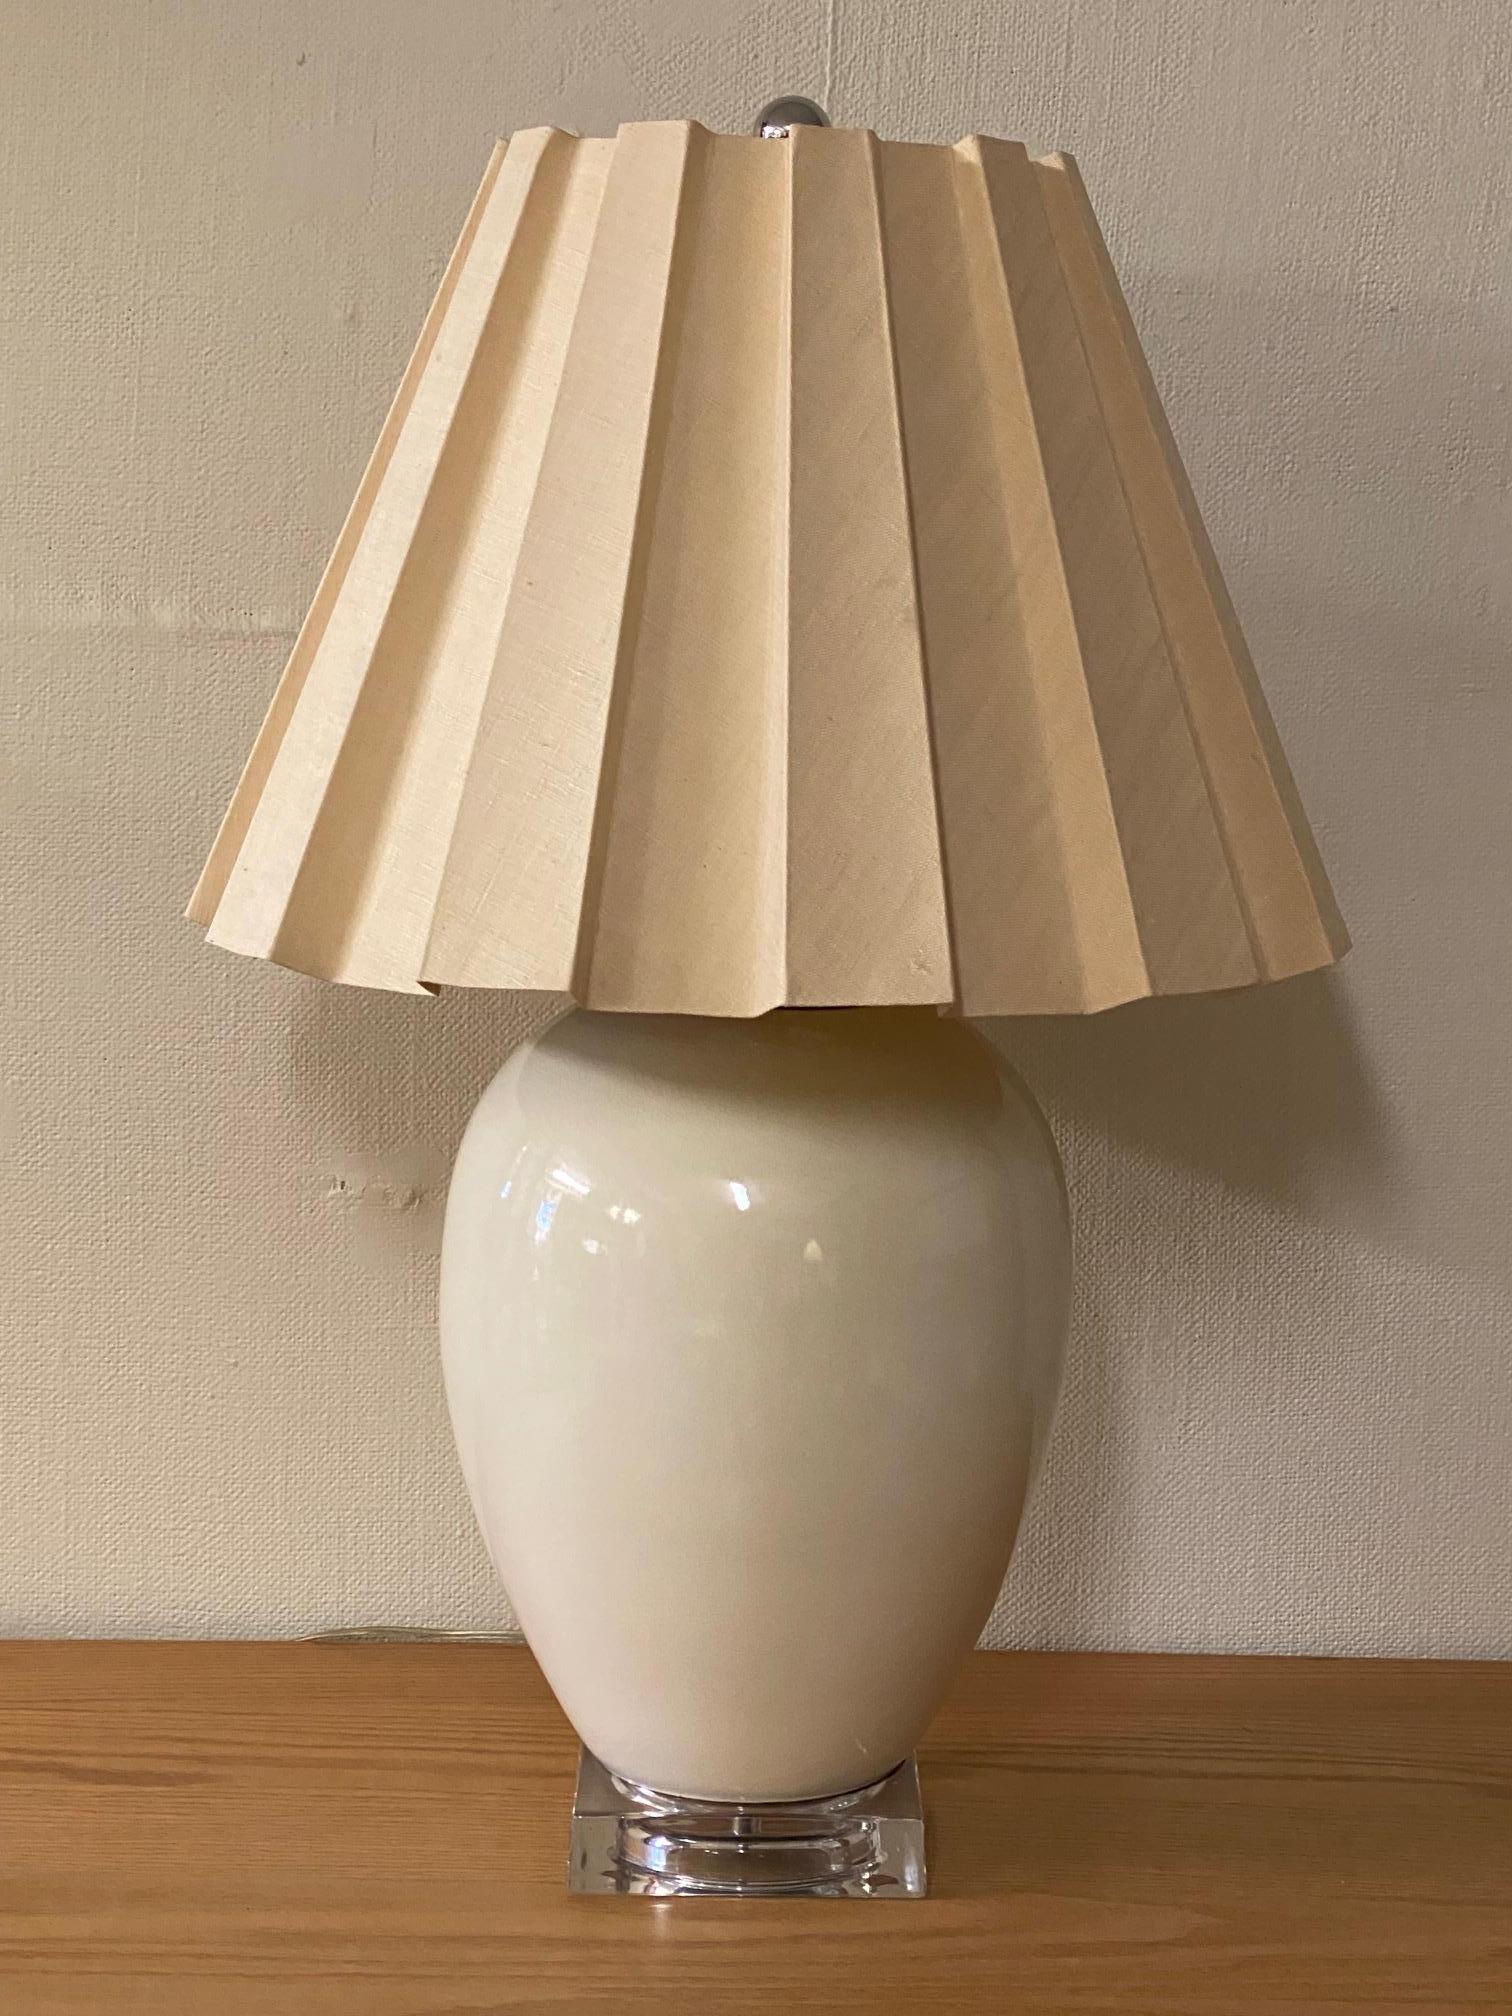 Vintage Ceramic Table Lamp by Chapman In Good Condition For Sale In Hopewell, NJ